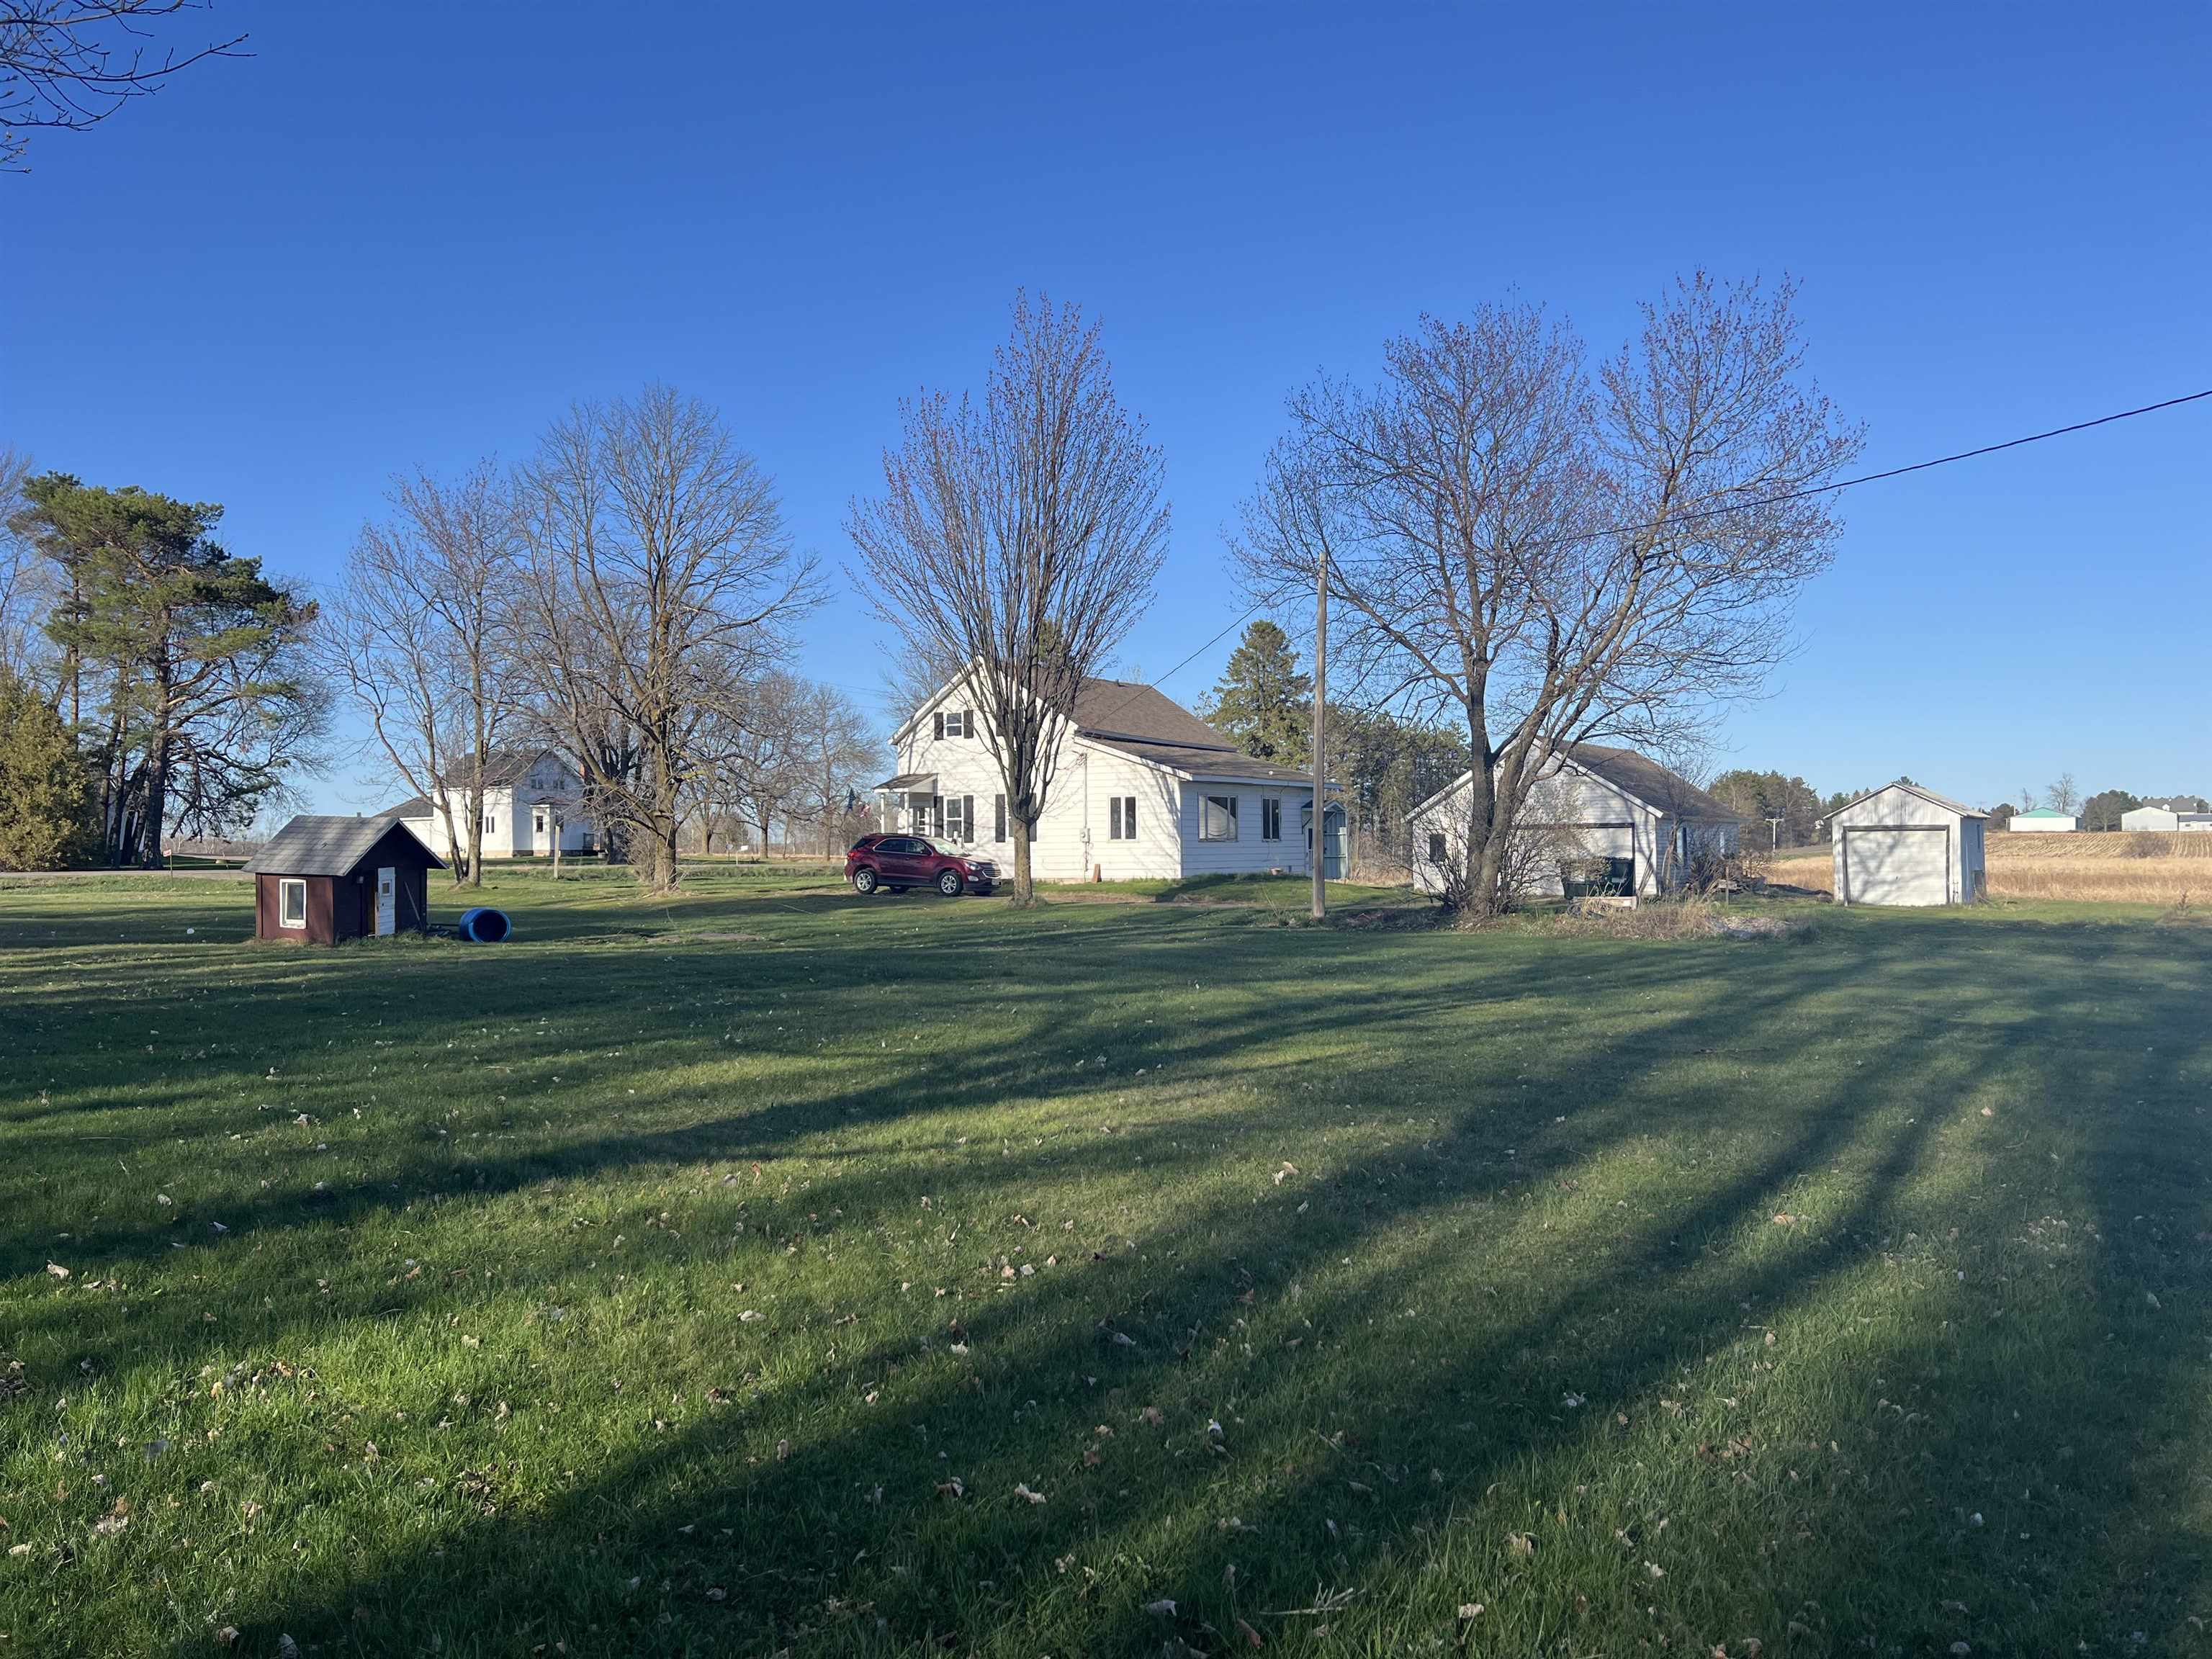 W4779 St STATE HIGHWAY 64, Medford, Wisconsin 54451, 3 Bedrooms Bedrooms, ,1 BathroomBathrooms,Residential,For Sale,W4779 St STATE HIGHWAY 64,22401724